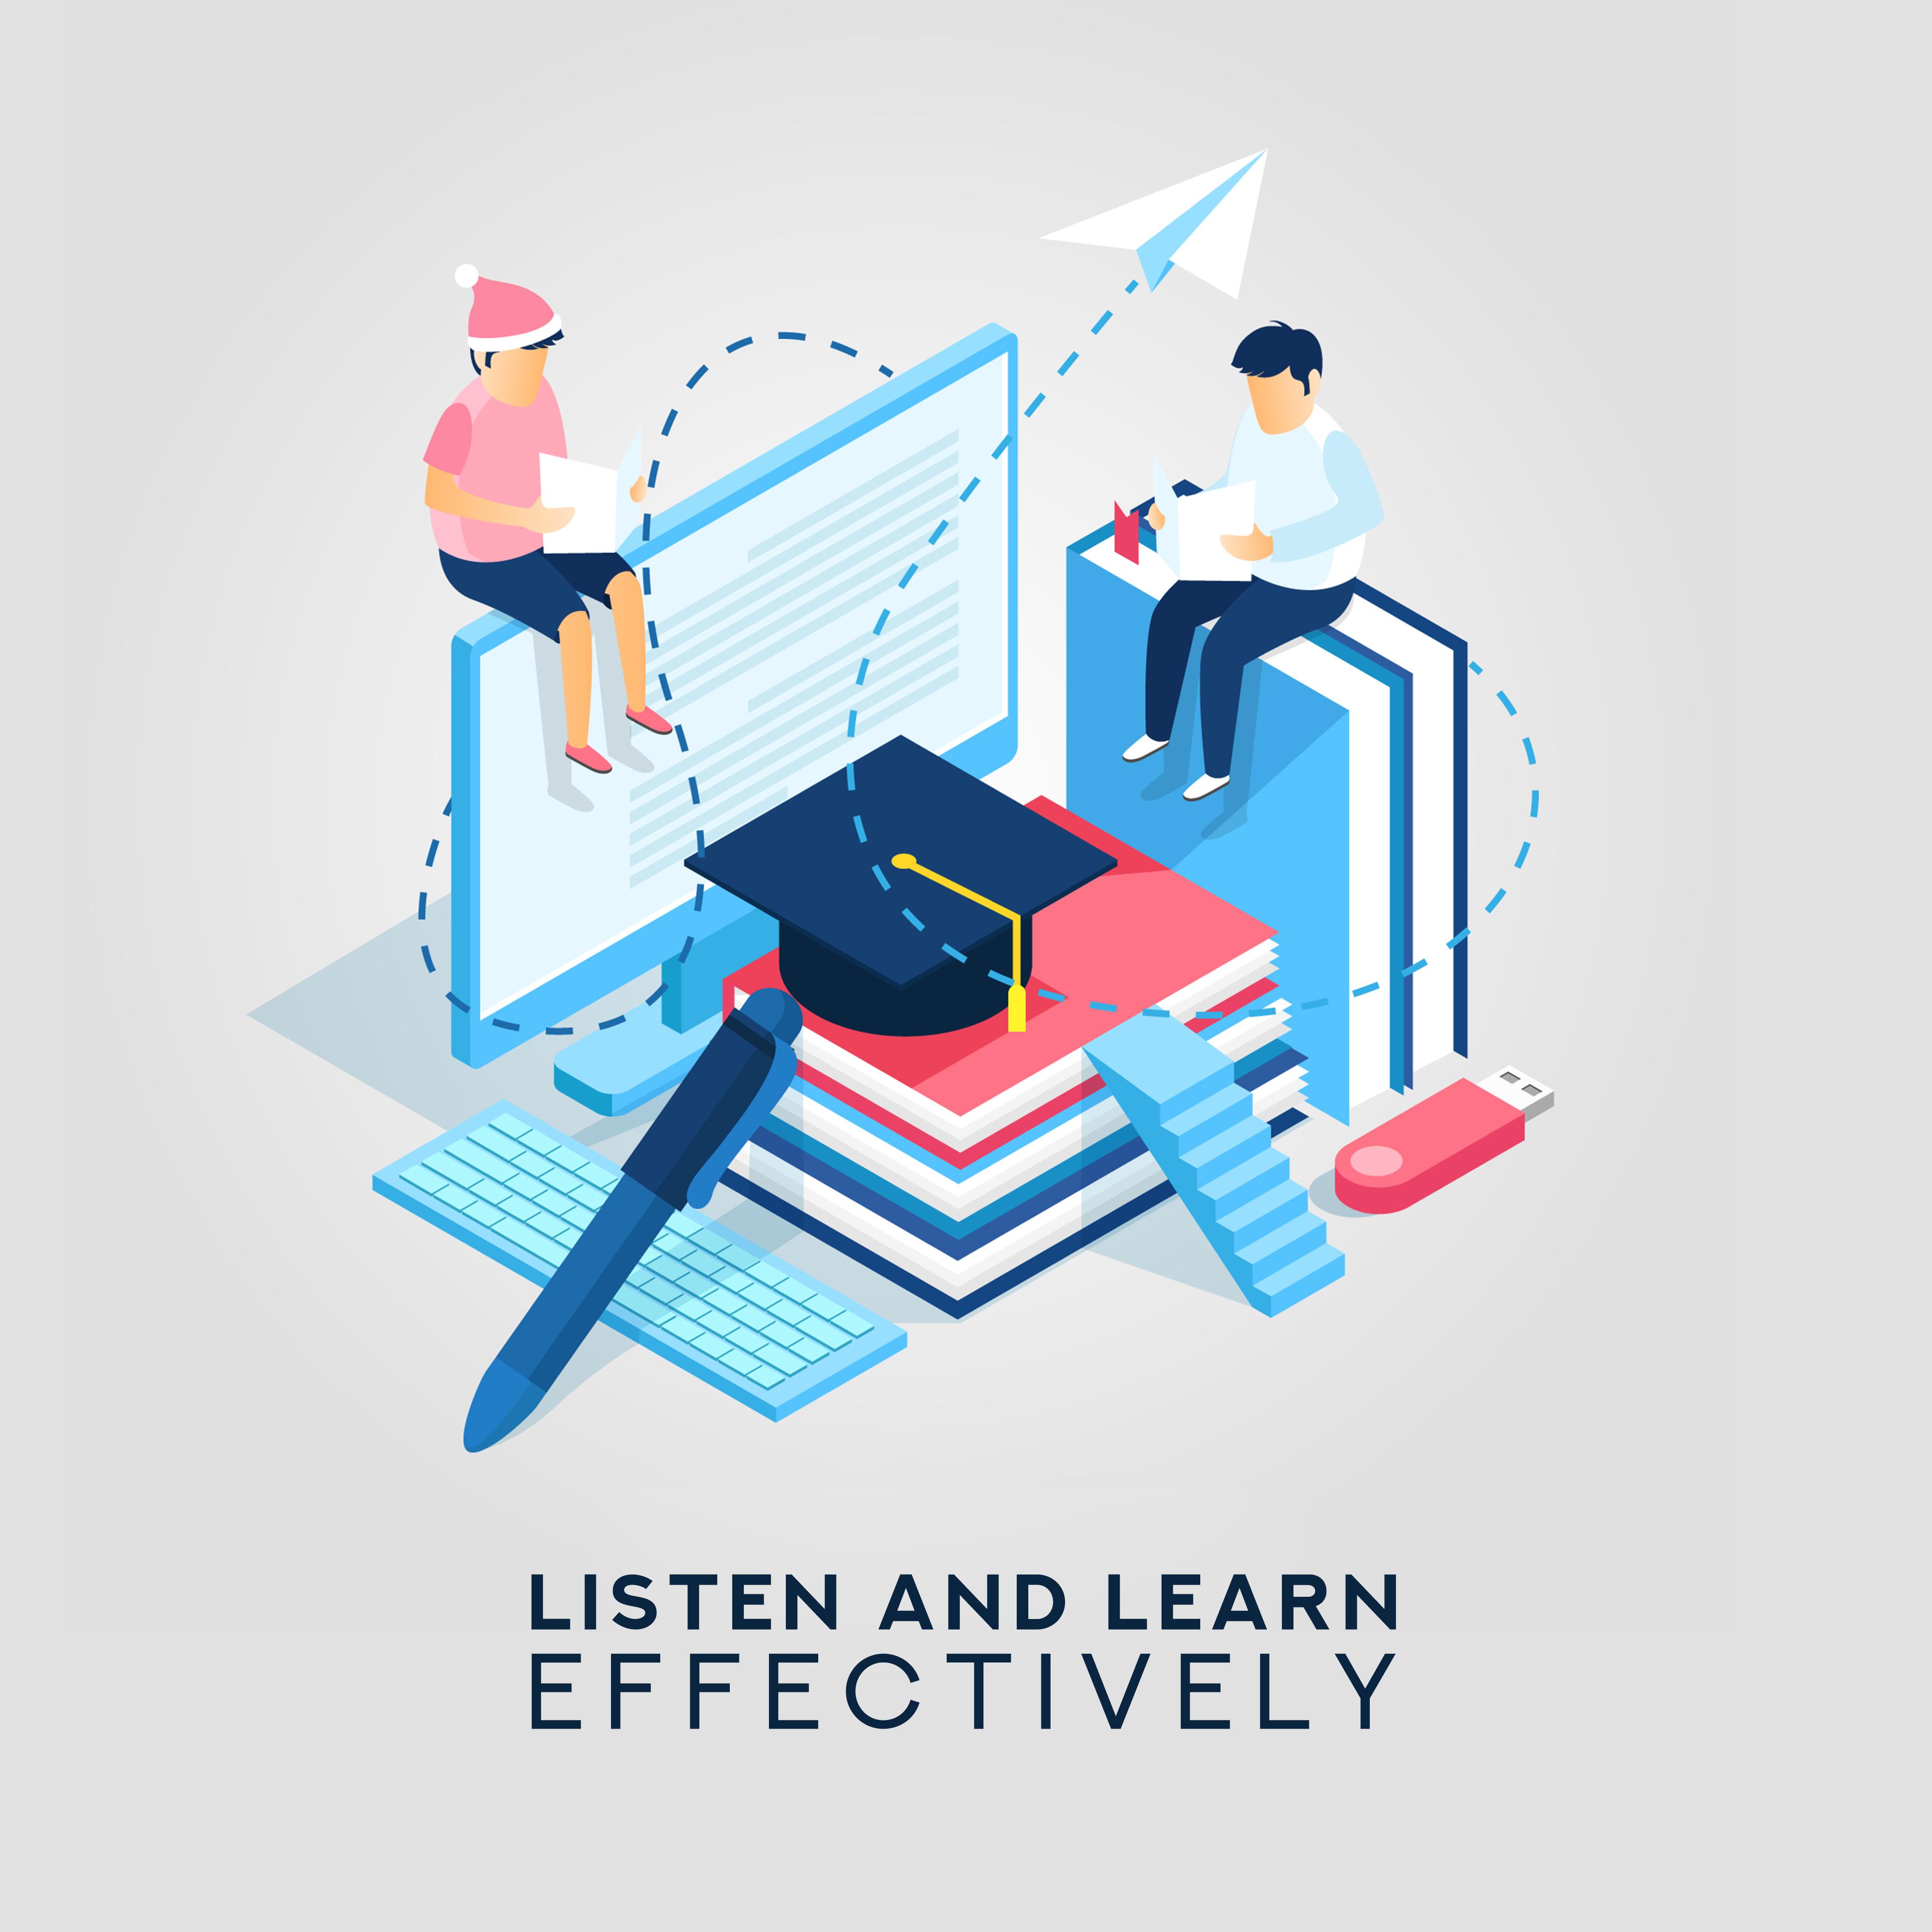 Listen and Learn Effectively - Music that Supports the Process of Remembering, Improves Concentration and Helps in Learning